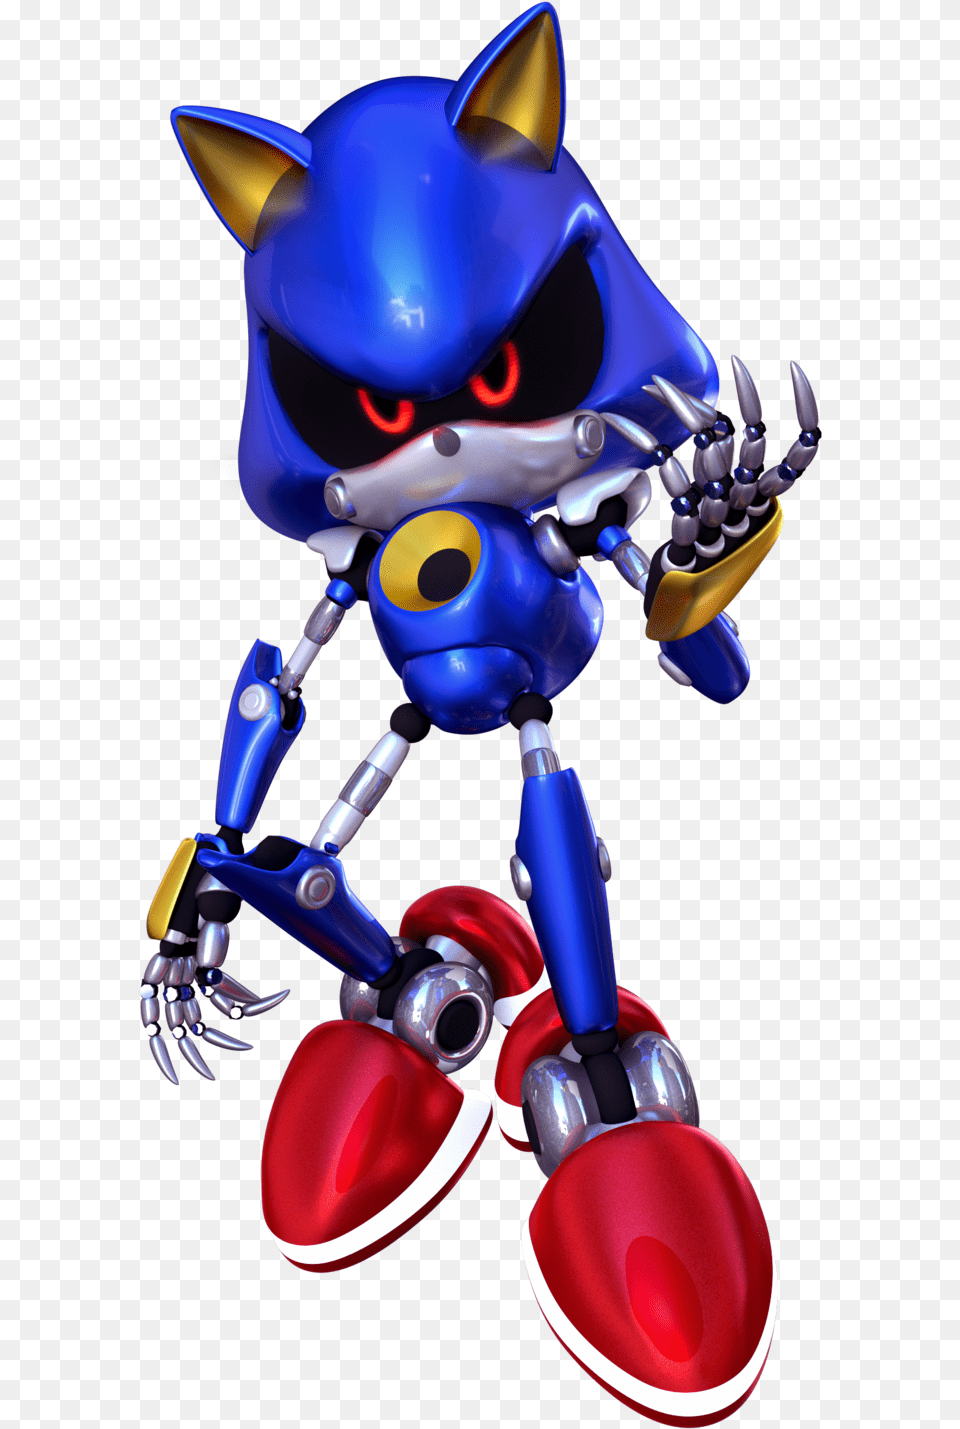 Metal Sonic Sonic The Hedgehog, Toy, Robot Png